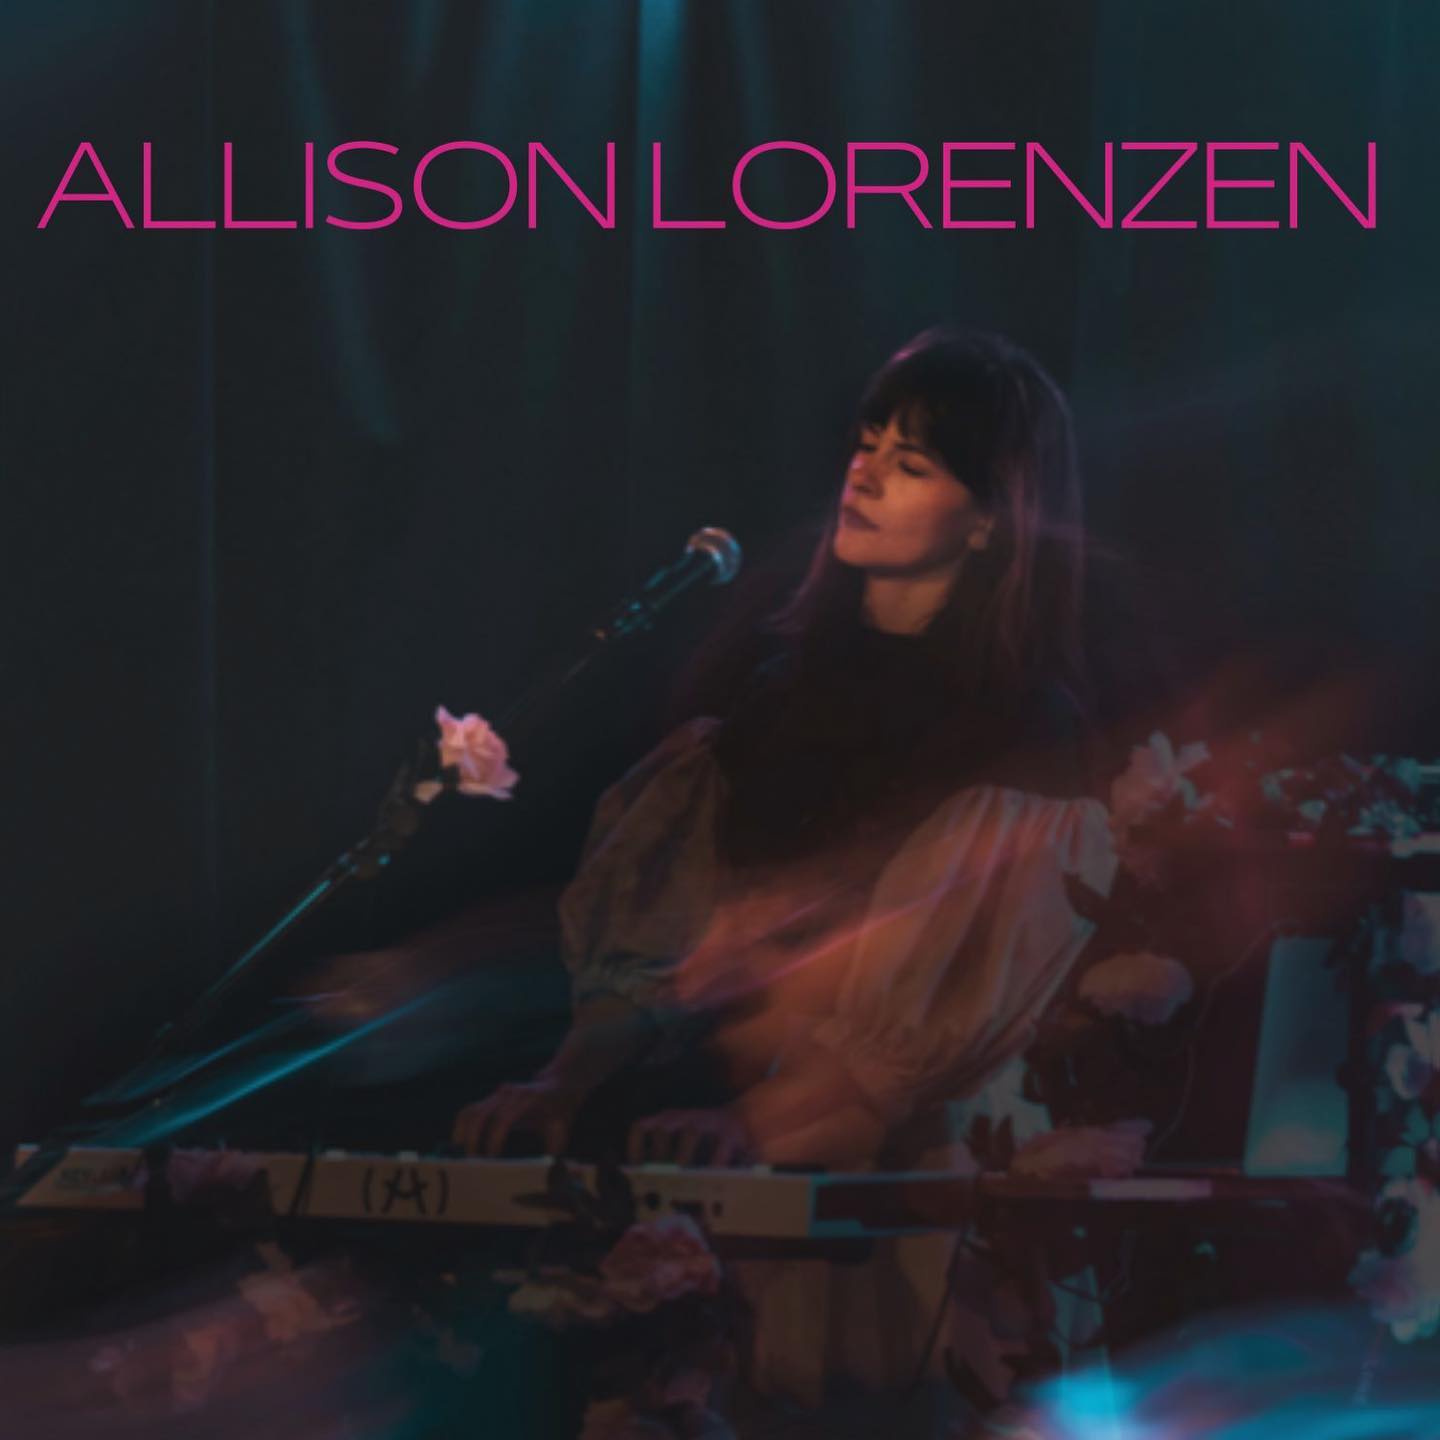 We are thrilled to welcome Allison Lorenzen this Sat, 11/12!! A Denver based artist (and sauna lover) whose work explores a minimalist approach to acutely felt dark-wave, dream pop. Brushed in deep strokes of lush synthesizers and gossamer vocals, her first solo album, Tender, was released by Whited Sepulchre Records in 2021 to critical praise from the likes of NPR, Spill Magazine, Austin Town Hall, and more. Tender was named Best New Album by Denver's Westword Magazine in 2022-

Join us for soak & sauna, bubbly & some light snacks~ while listening to gorgeous music. 7-9pm $75 link to tix in bio 💕🥂🎶